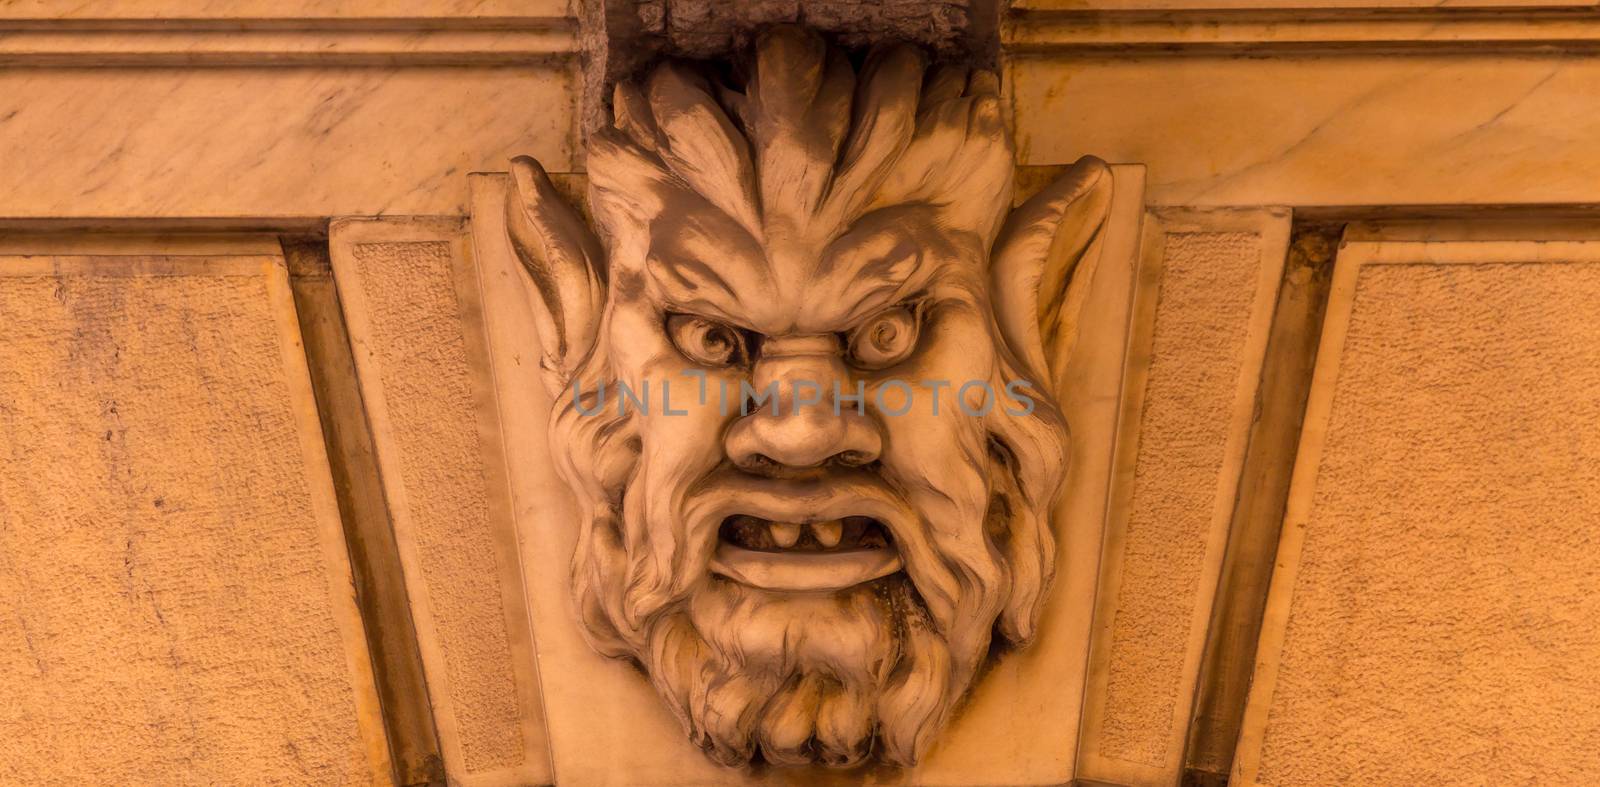 Italy, Turin. This city is famous to be a corner of two global magician triangles. This is a protective mask of stone on the top of a luxury palace entrance, dated around 1800